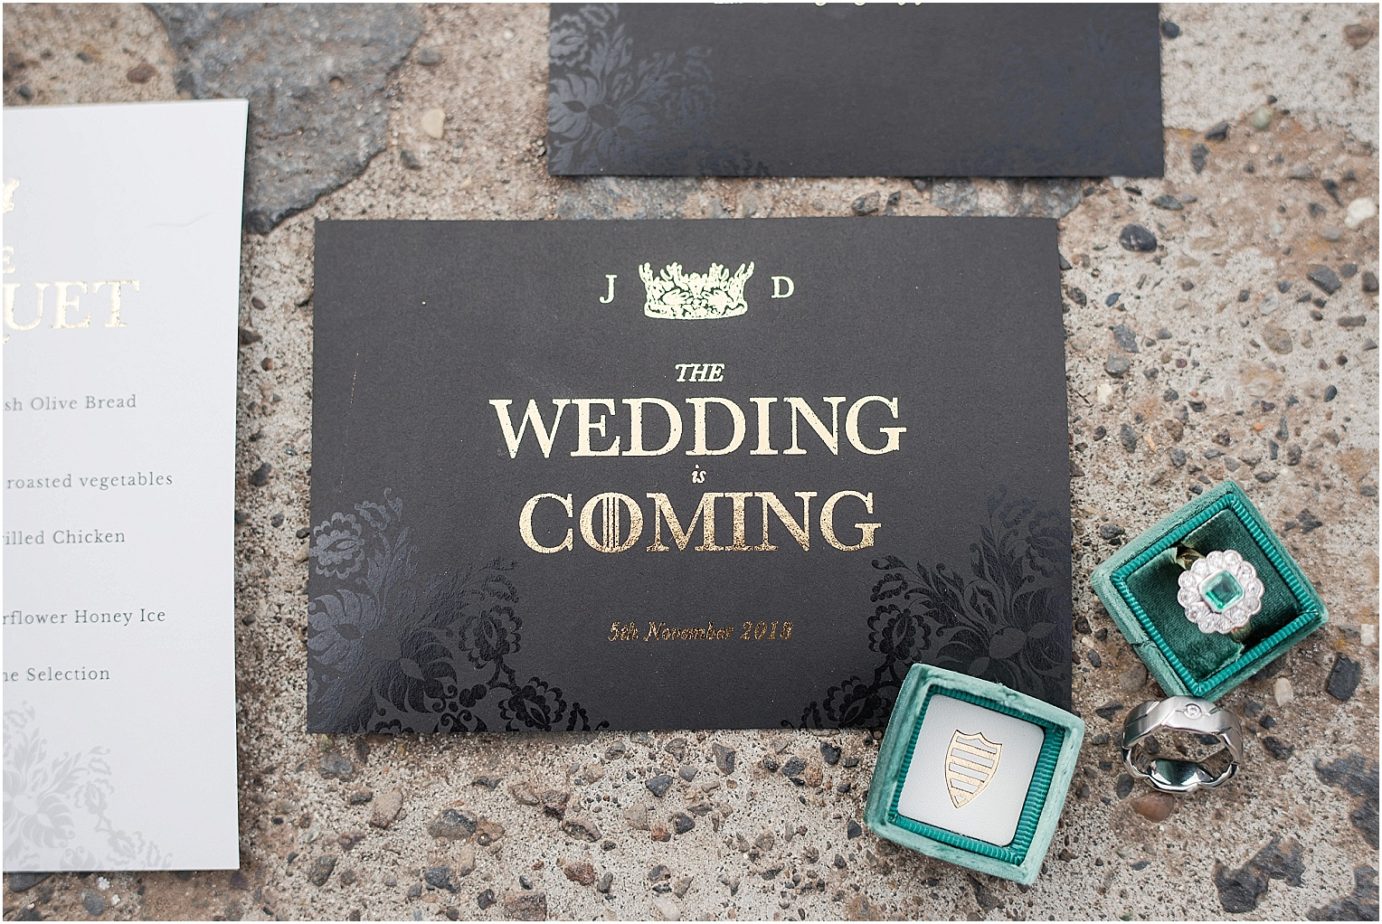 Game of Thrones wedding inspiration Goldendale WA Styled Shoot save the date card